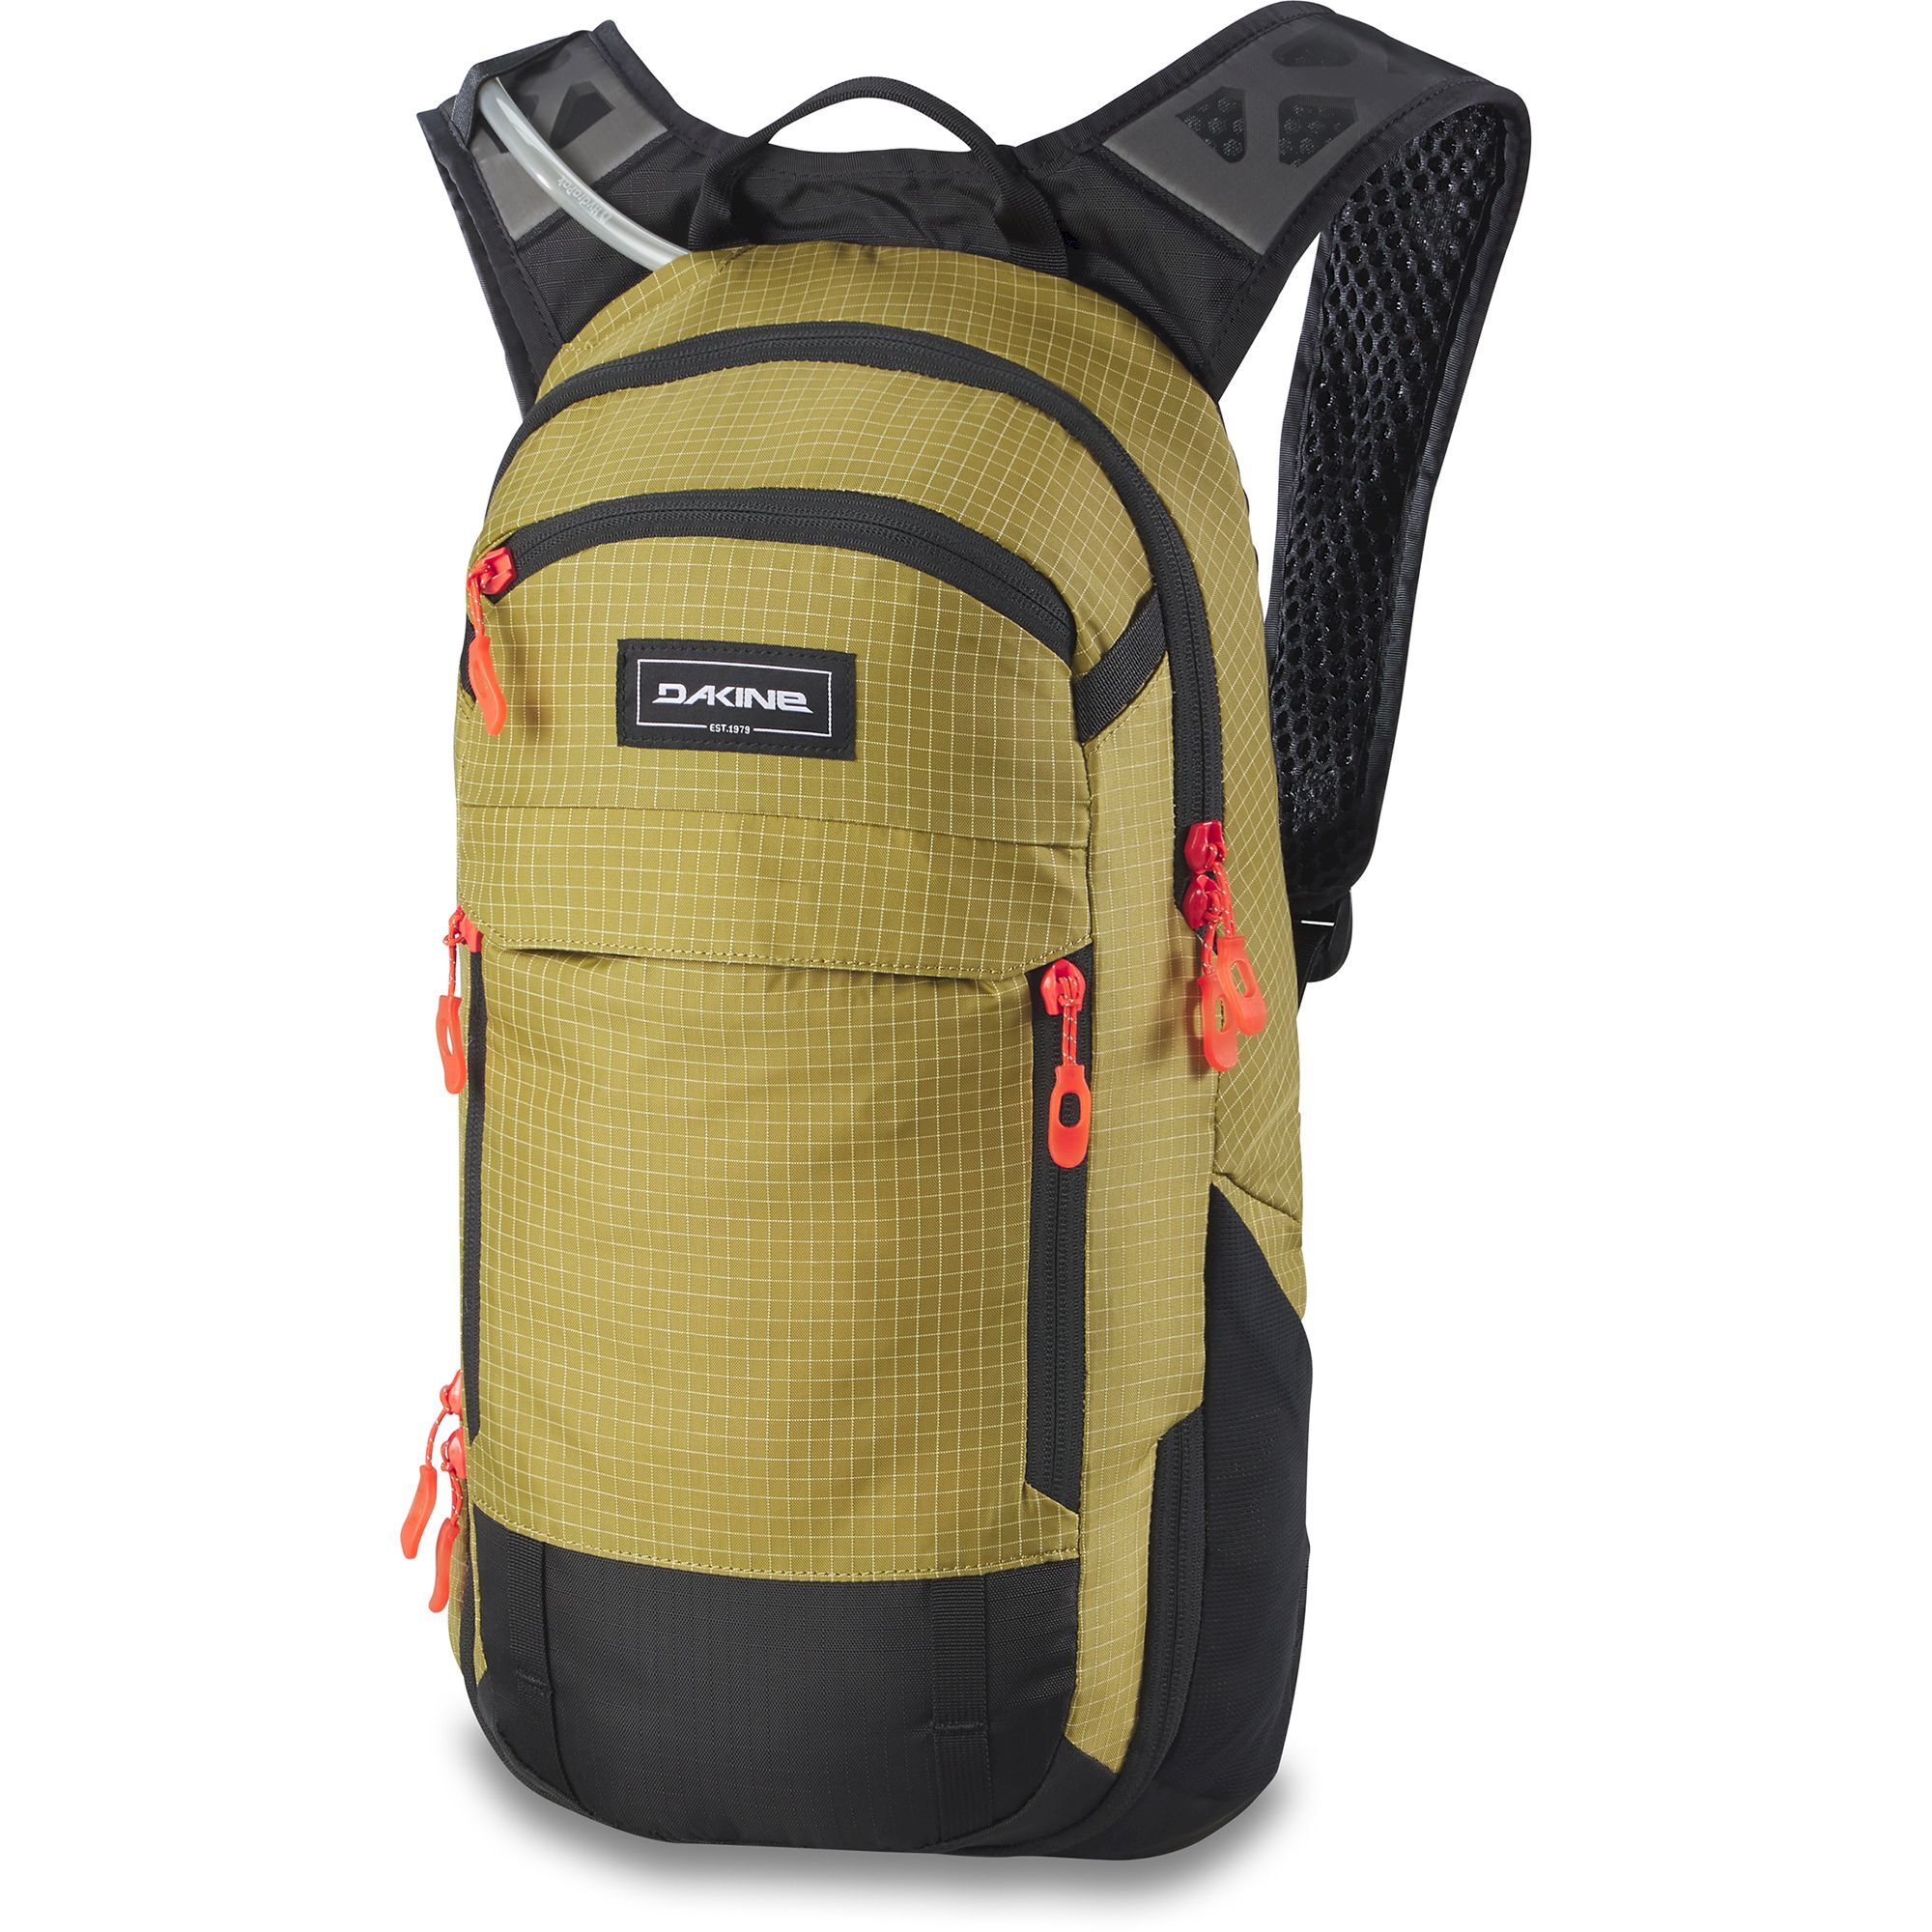 Dakine Syncline 12L 2021 - Cycling backpack - Men's